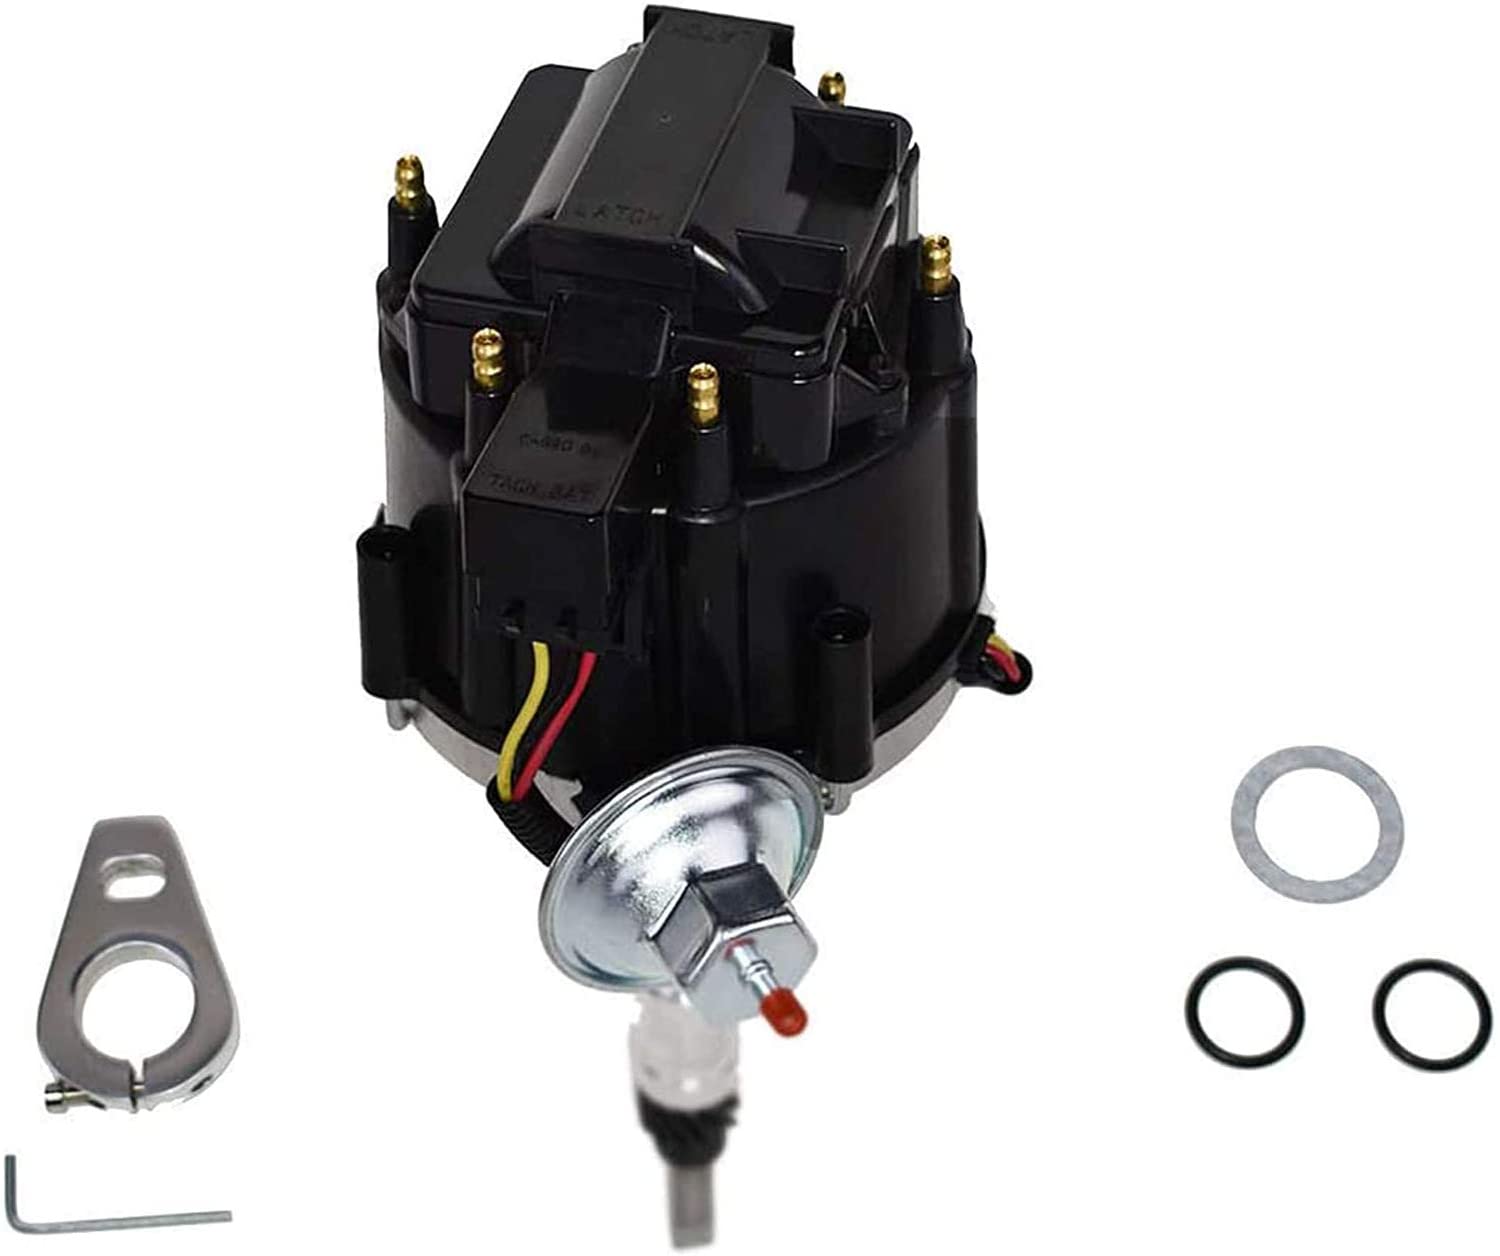 A-Team Performance HEI Complete Distributor 65K Coil Straight 6 41-62 194, 216, 235, 68-87 Compatible with Early Chevrolet Land Cruiser FJ40 FJ60 2F 3F One Wire Installation Black Cap (Black)